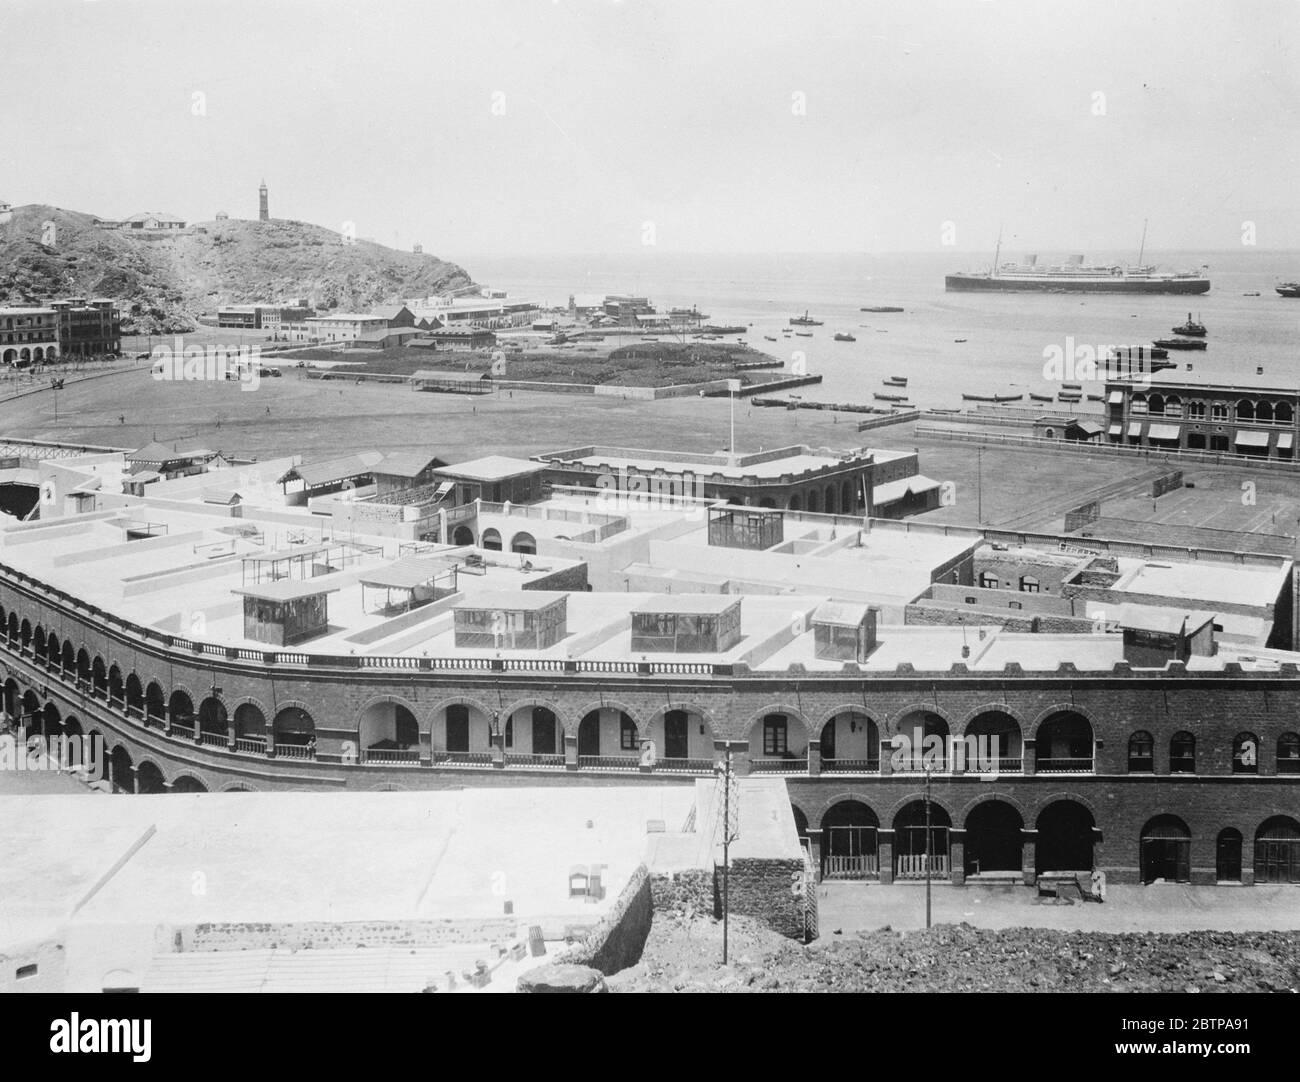 The Prince rushing home . HMW Enterprise , with the Prince of Wales on board , is expected at Aden . A general view of the harbour at Aden . 5 December 1928 Stock Photo